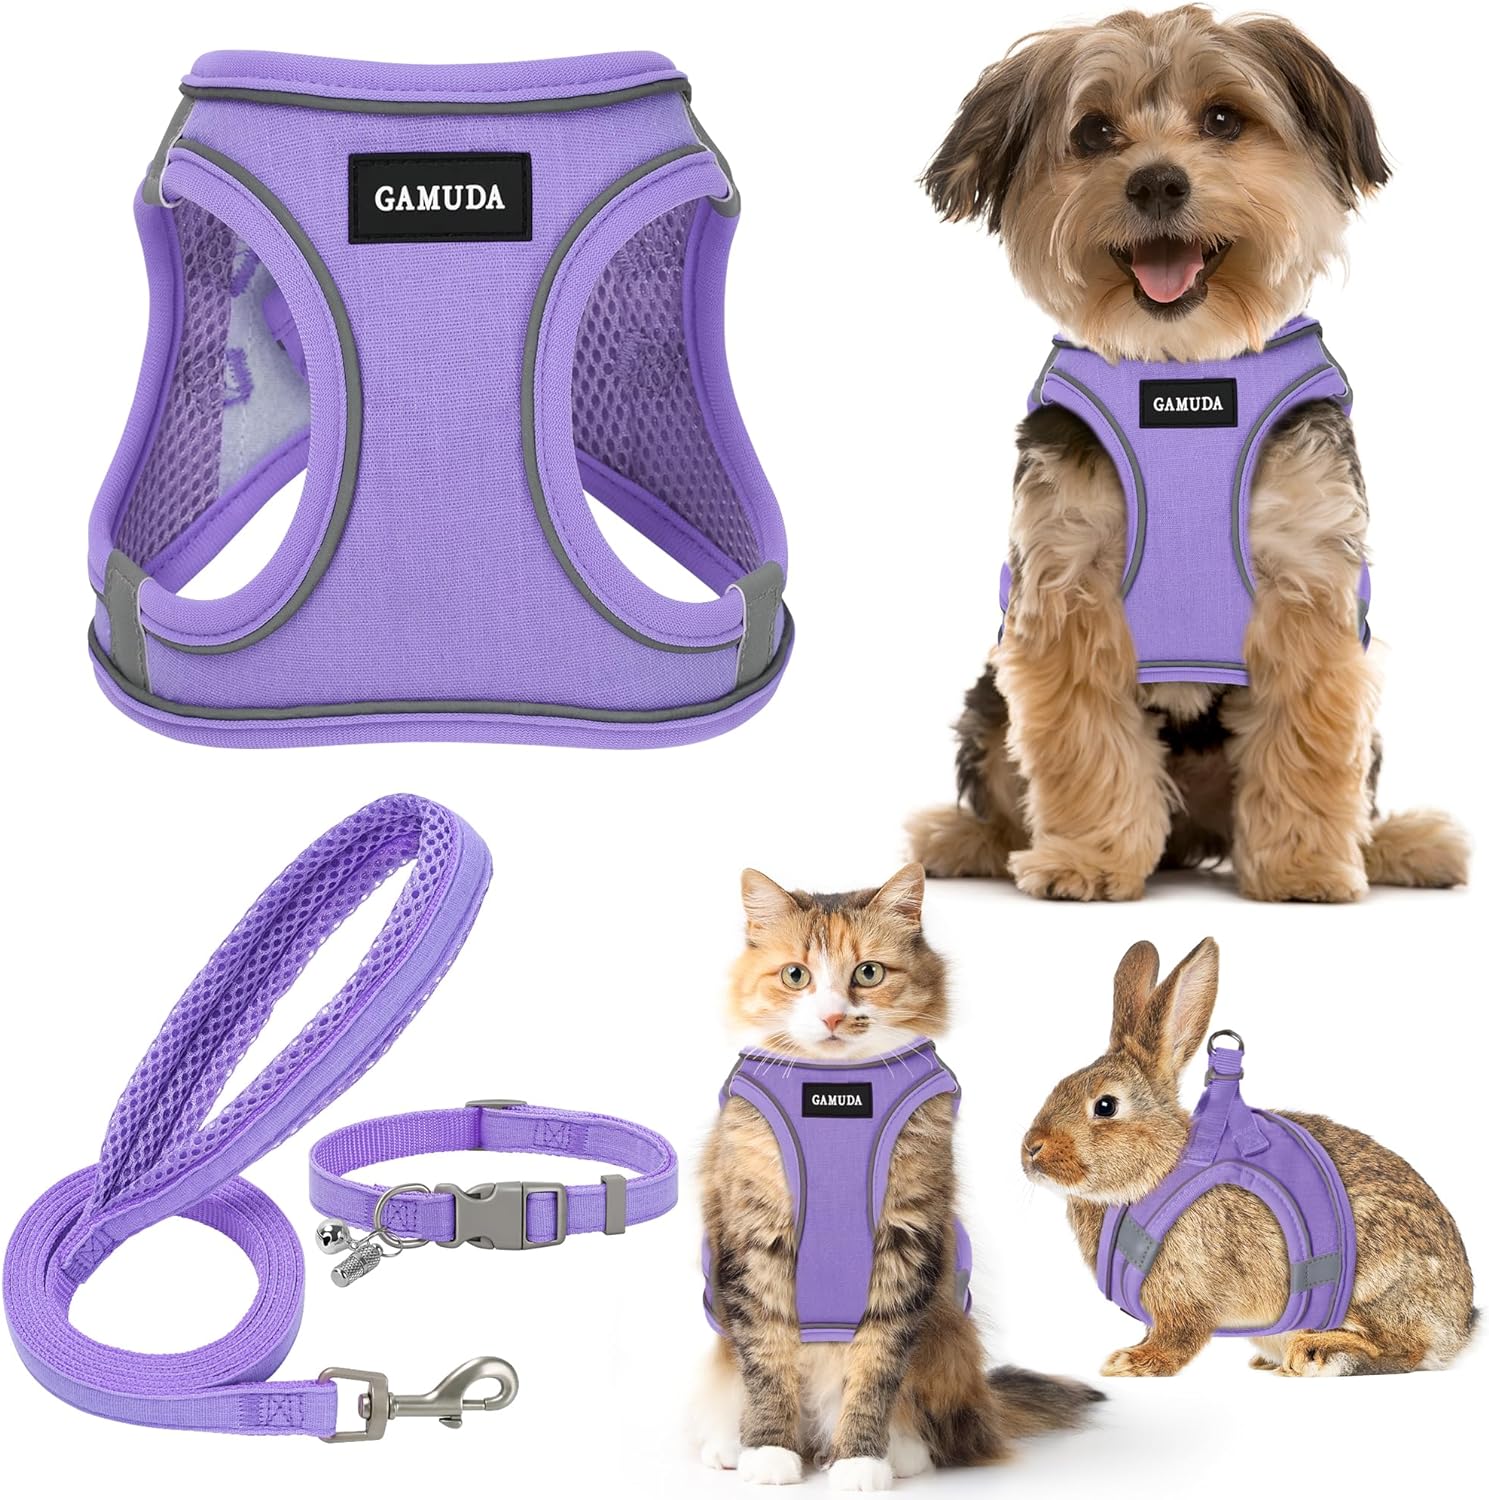 GAMUDA Small Pet Harness Collar and Leash Set, Step in No Chock No Pull Linen Fabric Soft Mesh Dog Vest Harnesses Reflective for Dogs Puppy Cats Kitten Rabbit (XS, White)